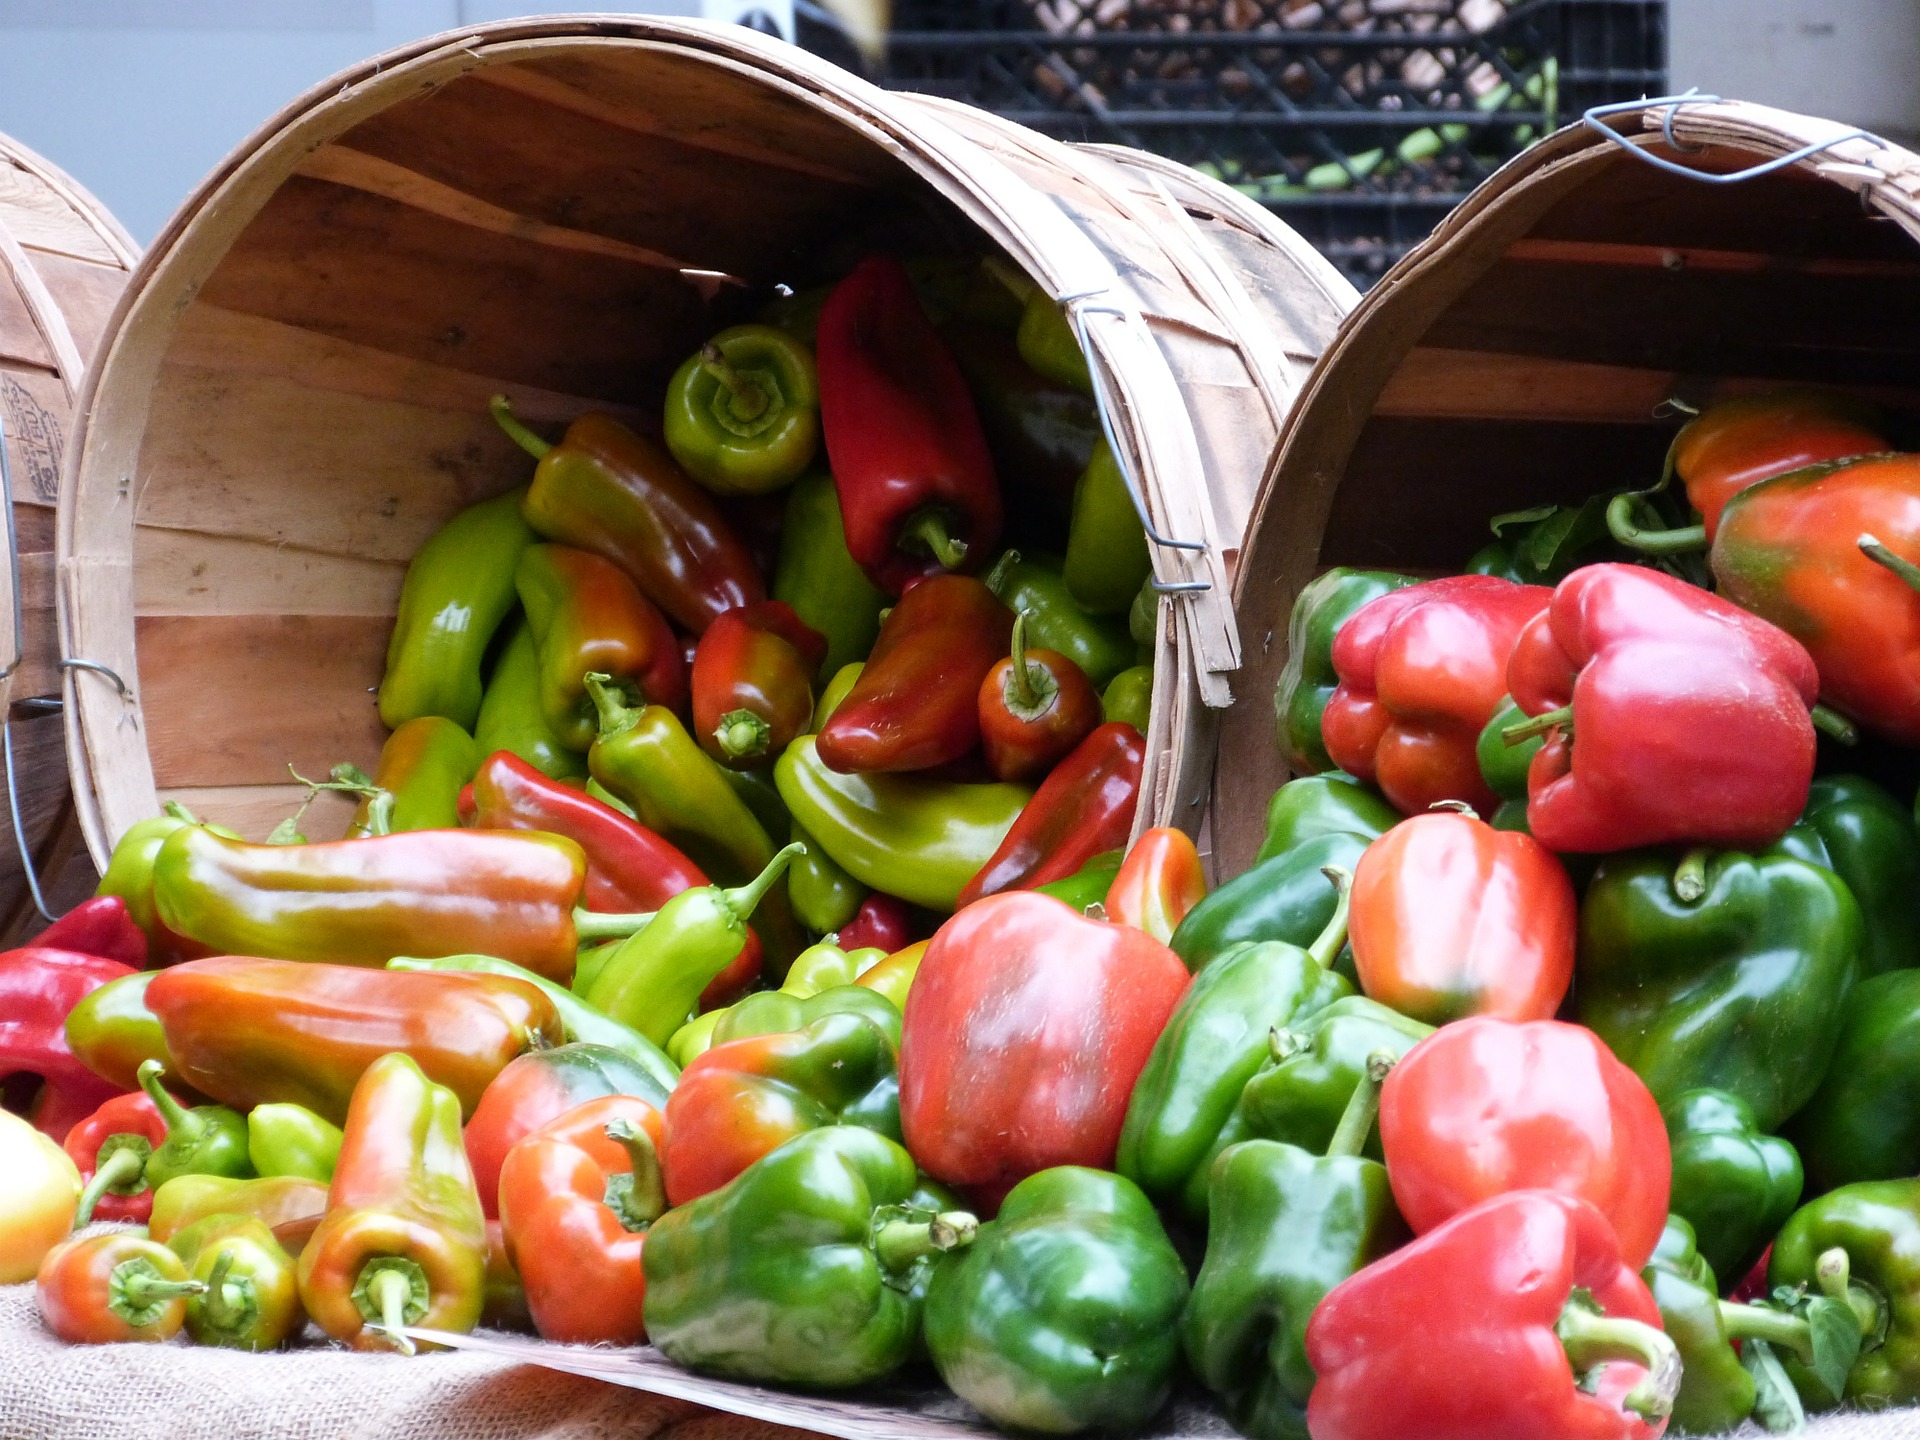 Will eating more chilis help you live longer? - Harvard Health